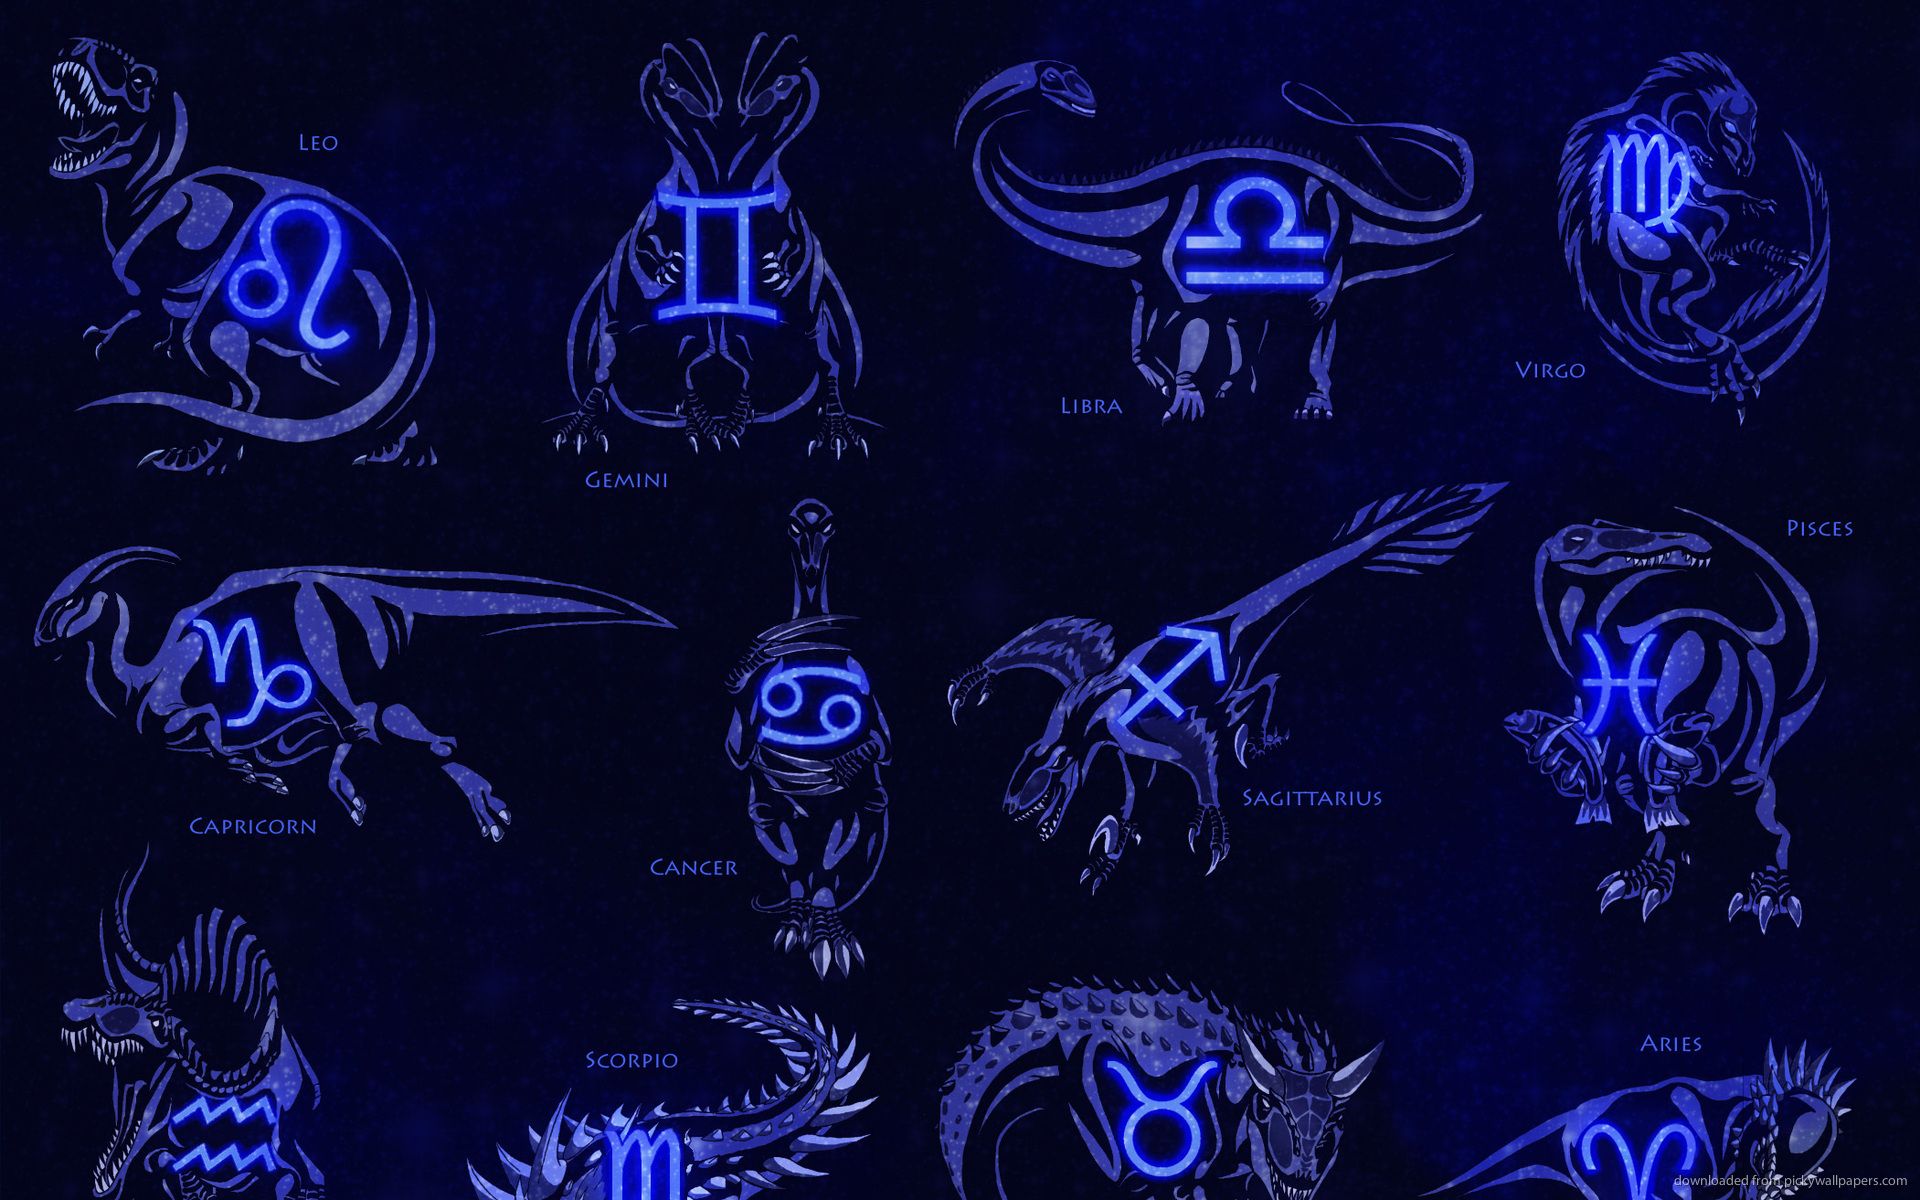 Free download zodiac wallpaper background space background check